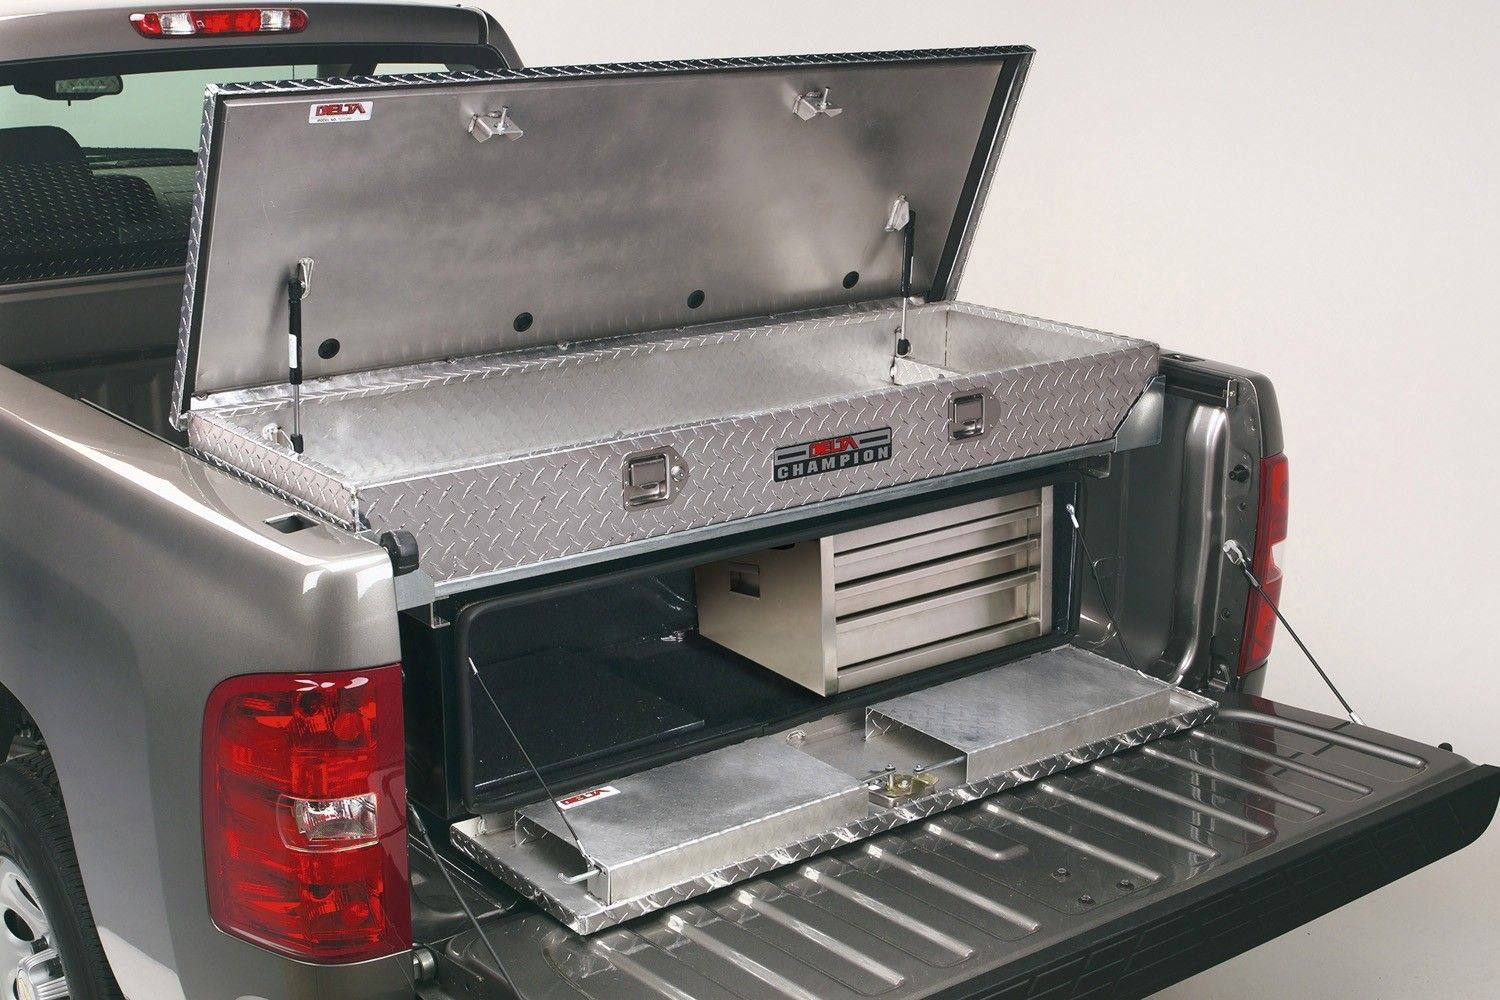 How To Open A Truck Tool Box Without The Key